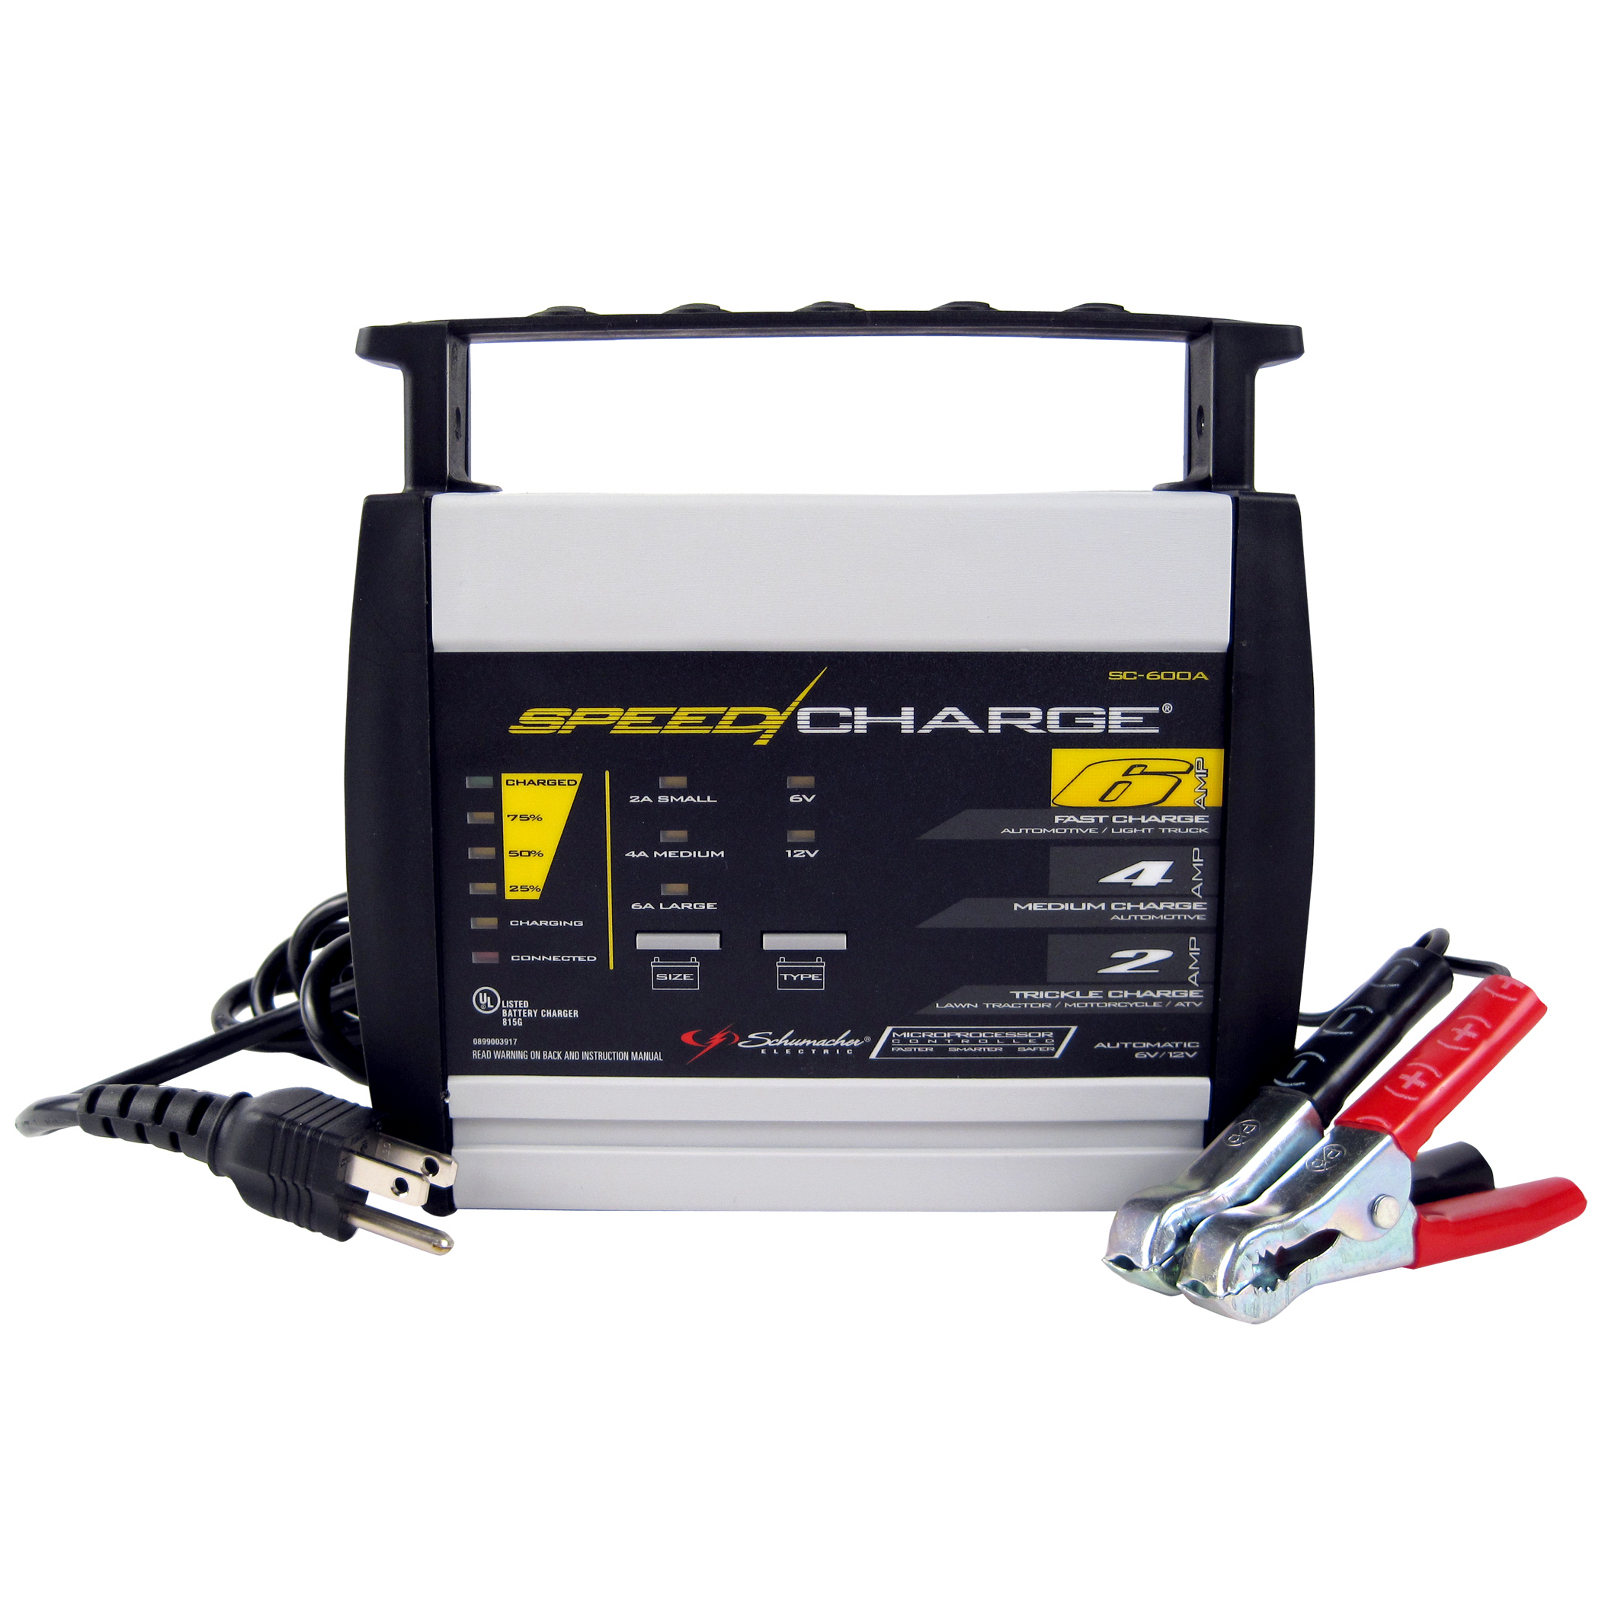 6-Amp SpeedCharge Battery Charger